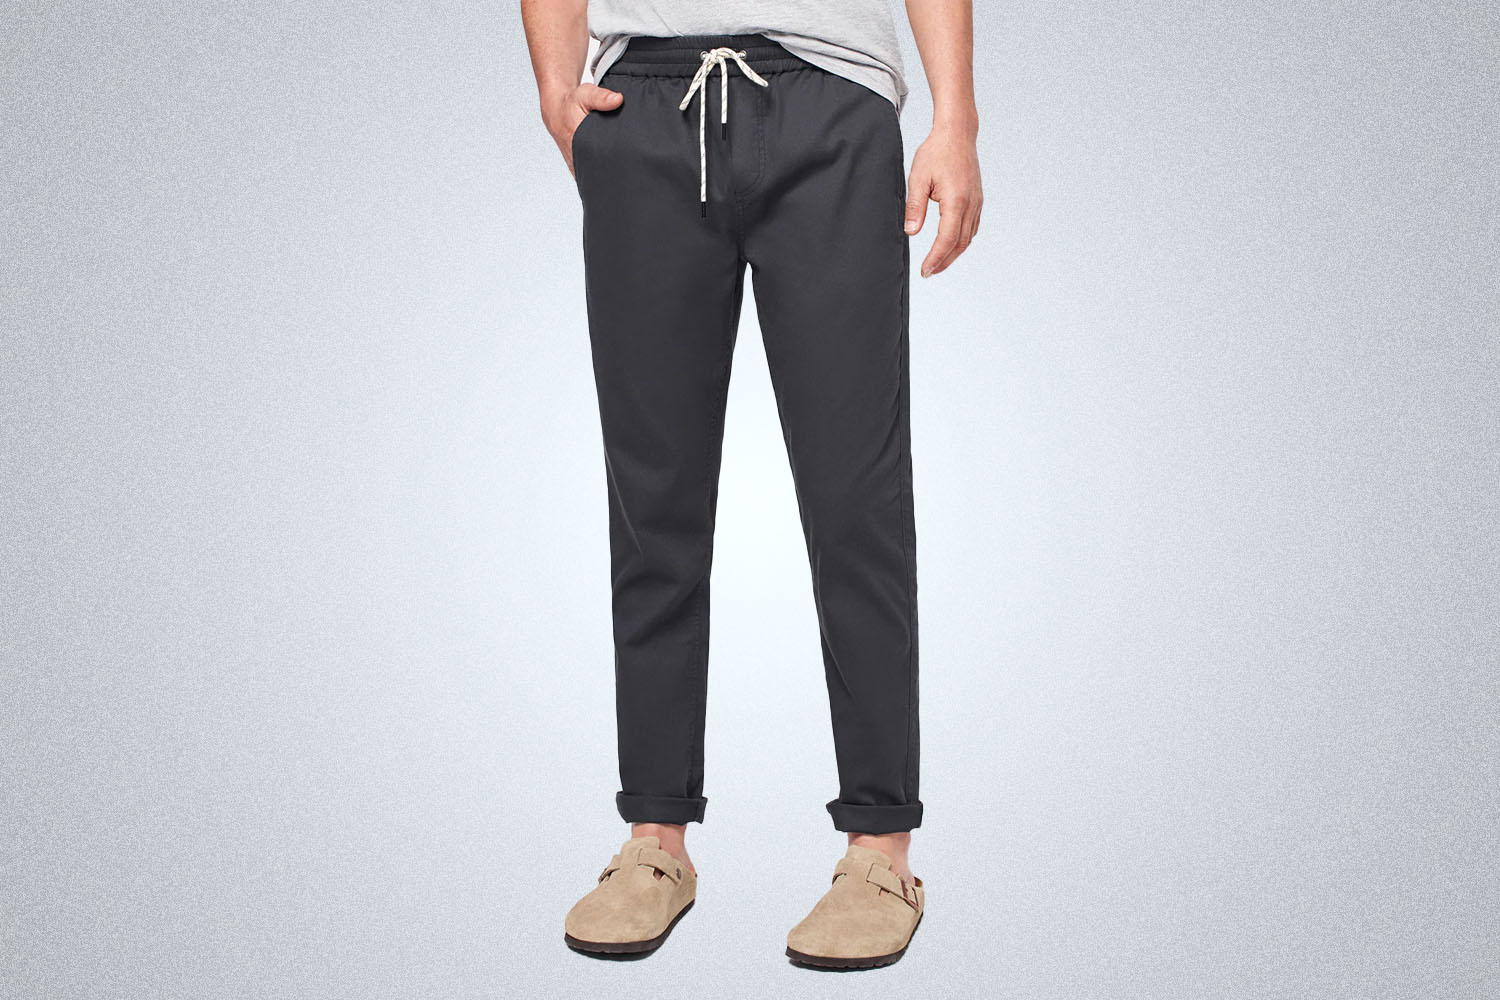 a pair of grey pants from Faherty on a grey background